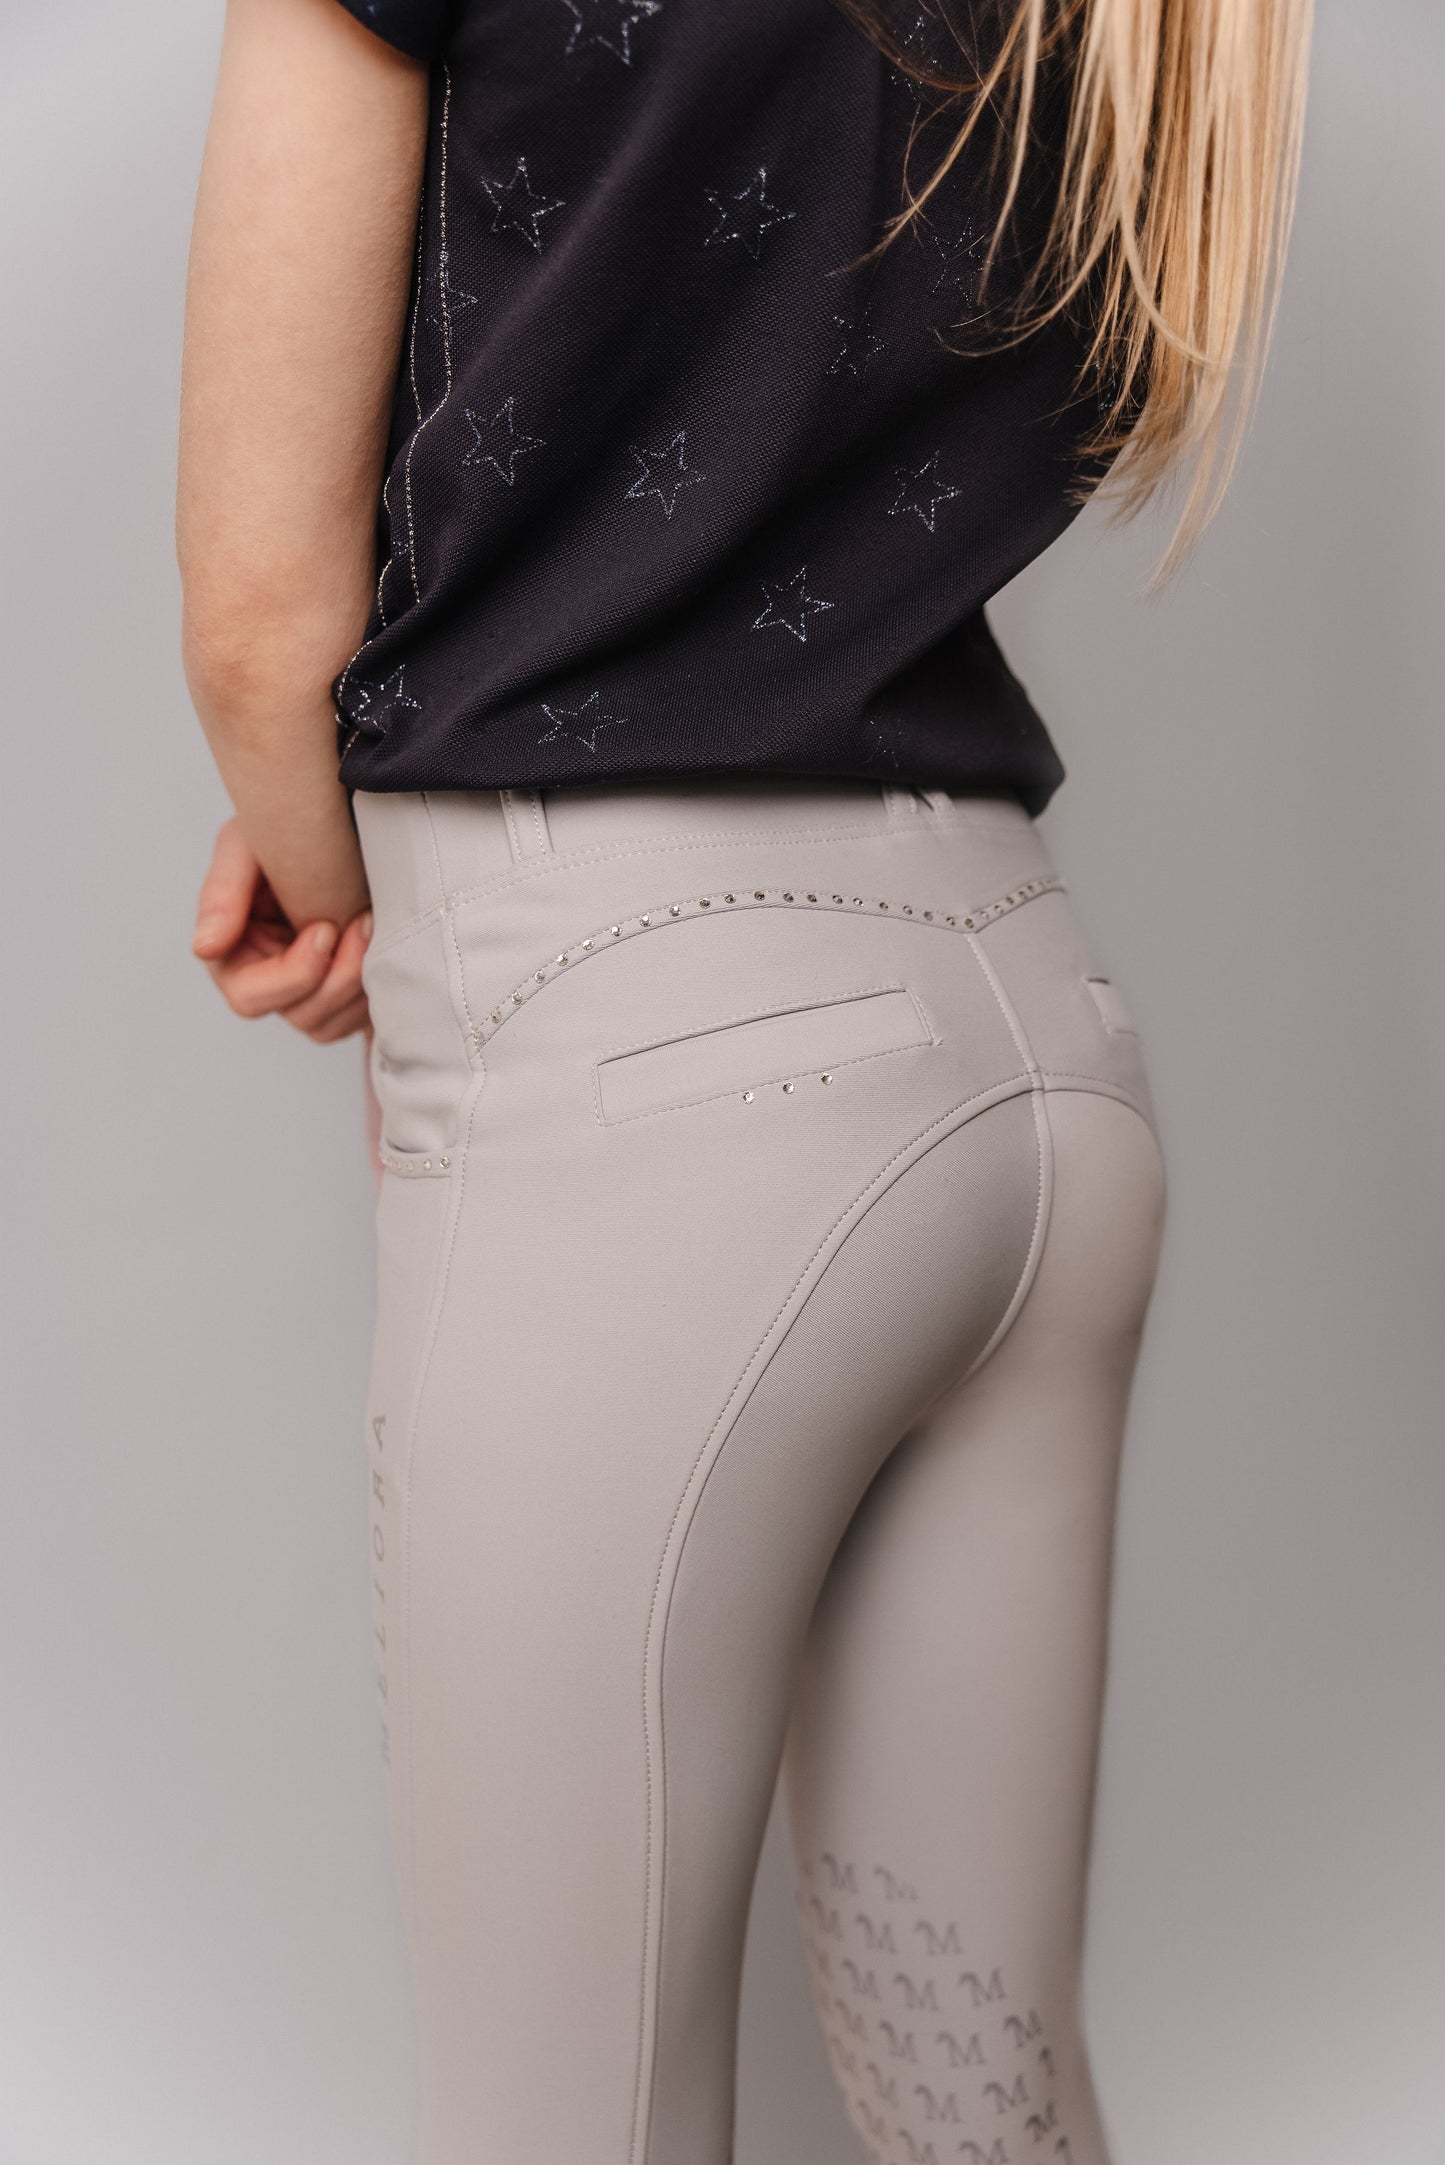 Grey Competition Breeches by Meliora Equestrian perfect for younger riders - photo of breeches